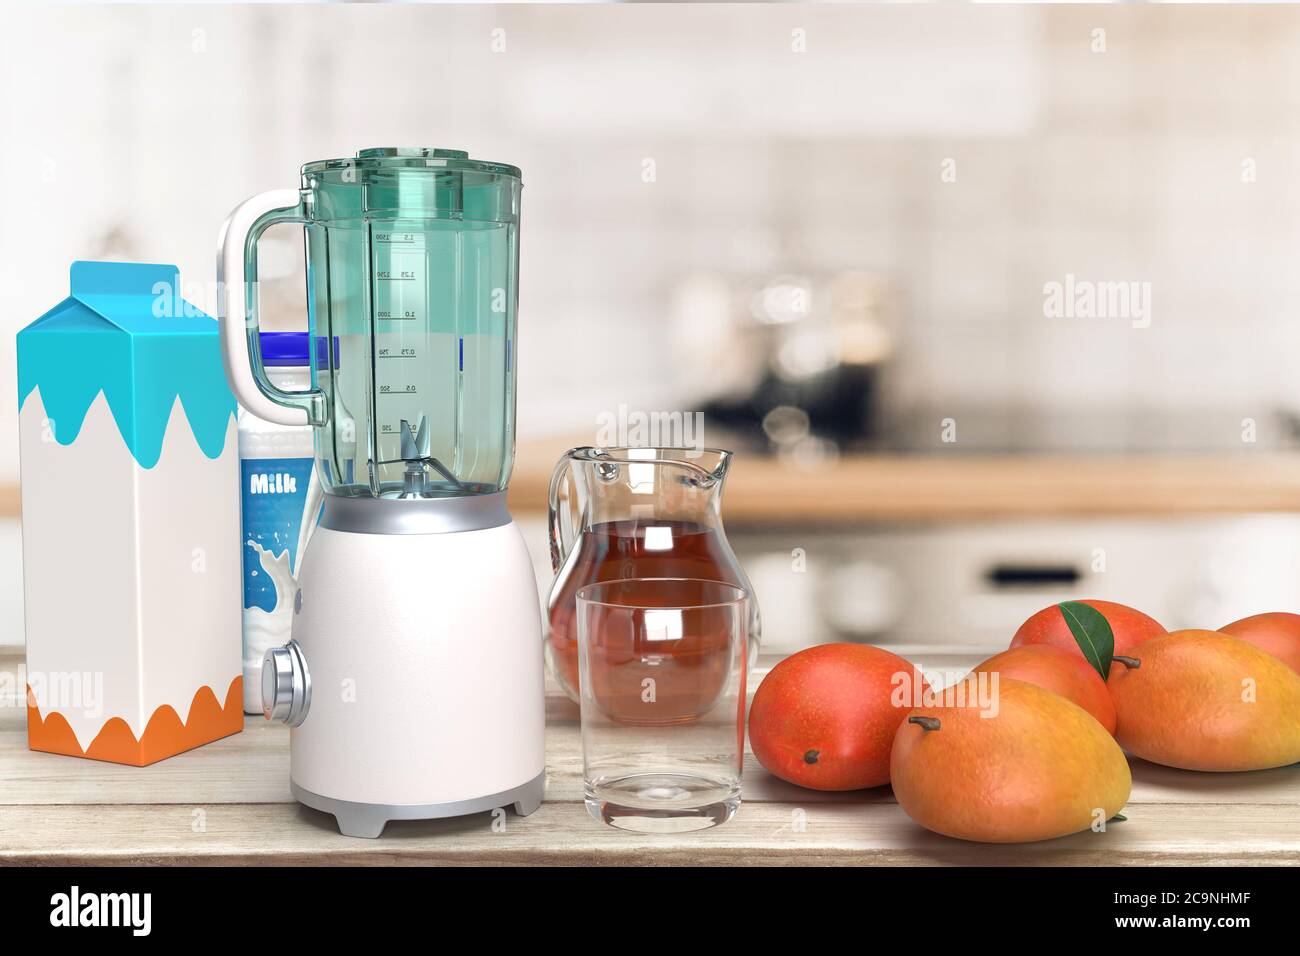 https://c8.alamy.com/comp/2C9NHMF/realistic-looking-mixer-grinder-milk-cartoon-glass-container-and-ripe-mangos-at-wooden-table-top-in-blurred-kitchen-interior-background-3d-renderin-2C9NHMF.jpg